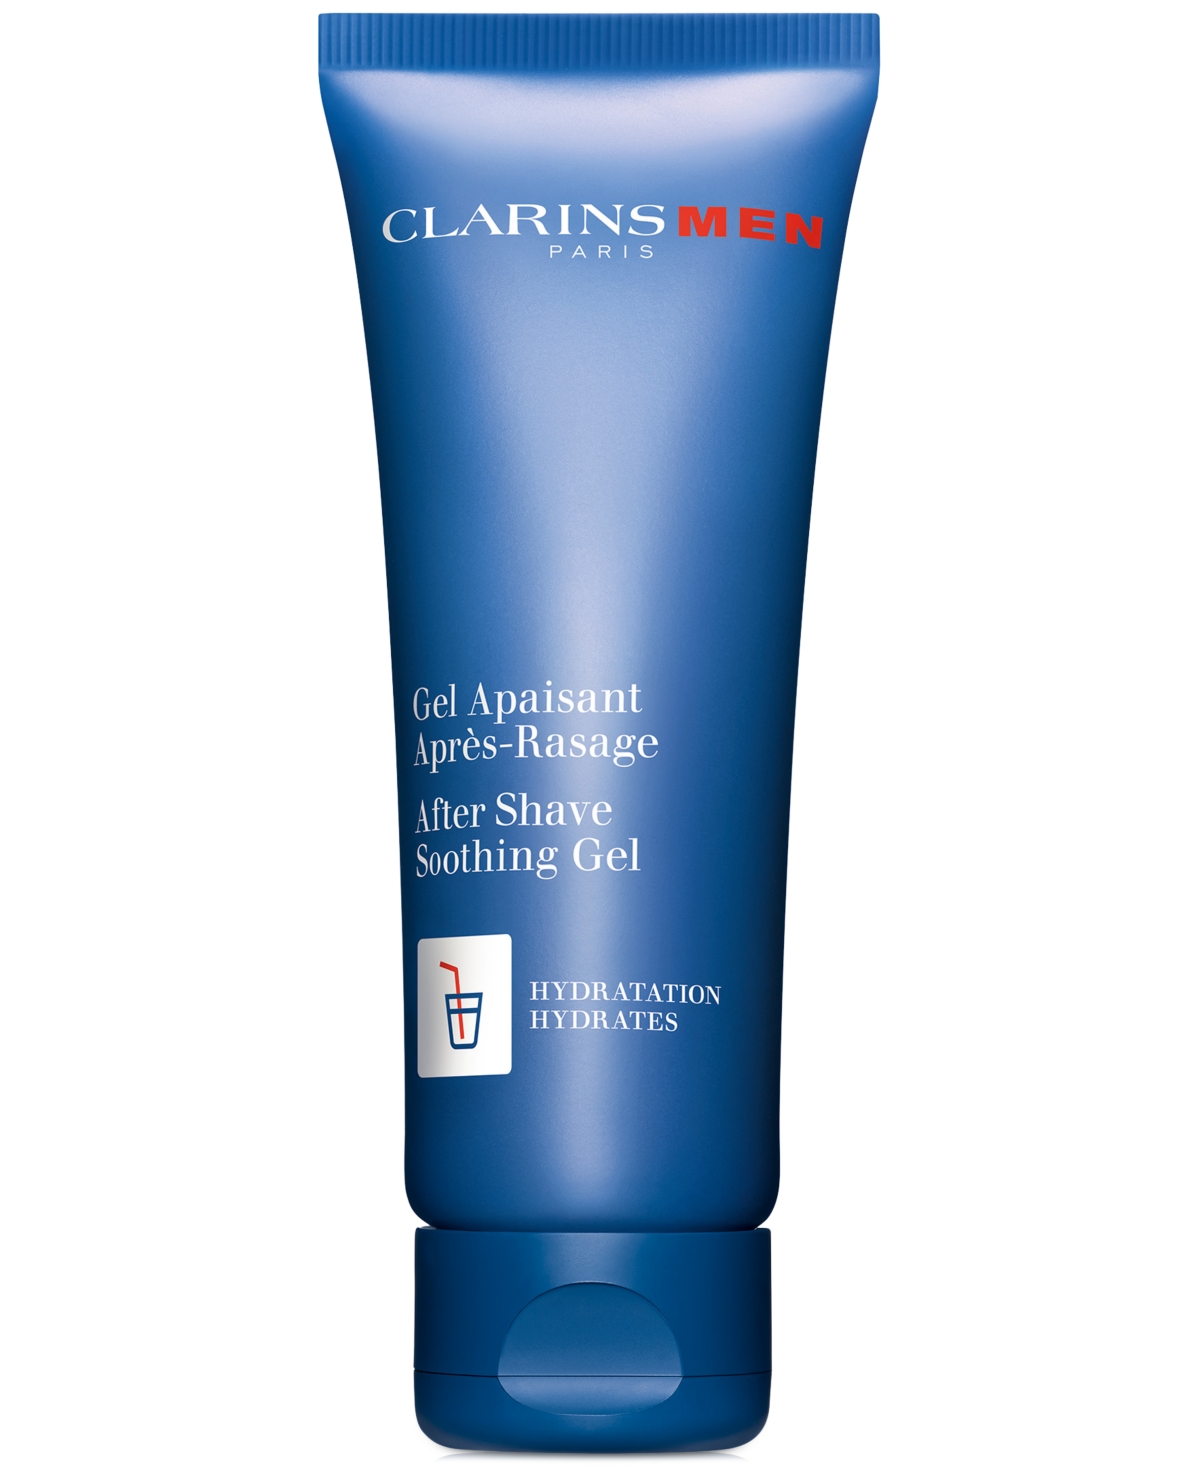 Clarins Clarinsmen After Shave Hydrating & Soothing Gel